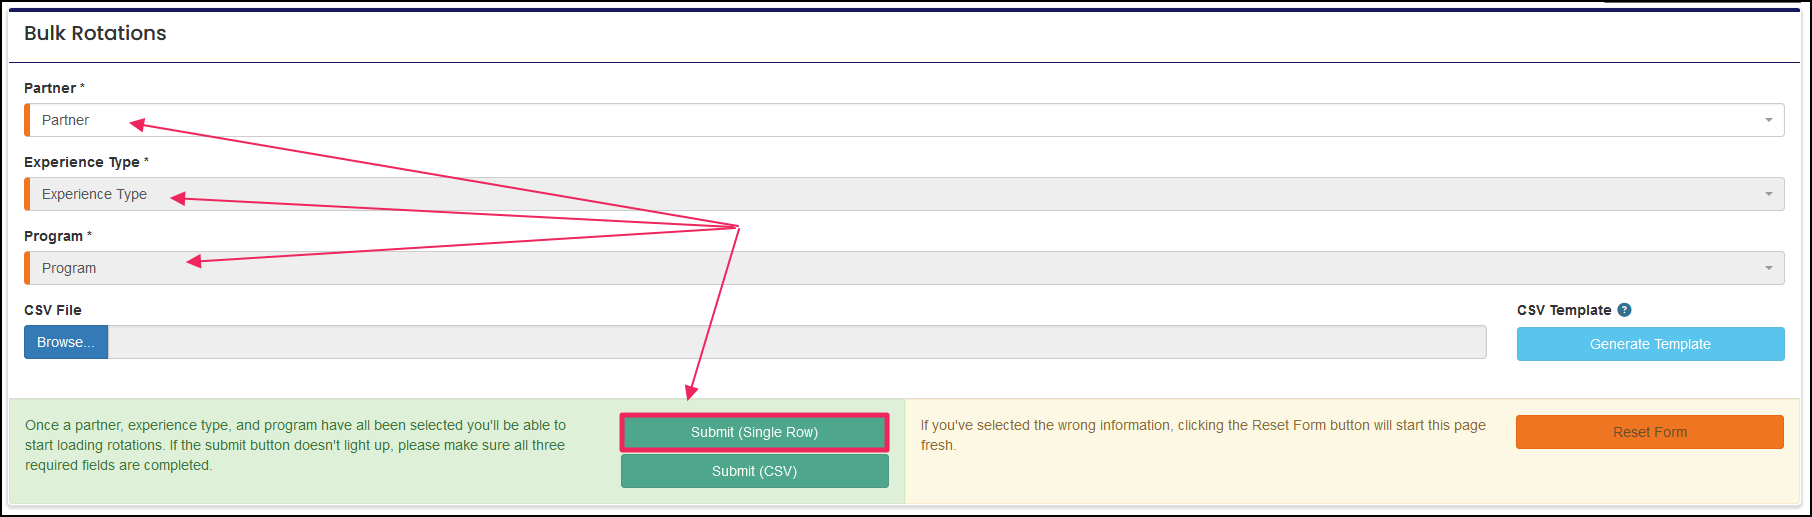 Bulk rotations form highlighting Partner, Experience Type, Program fields, and the "Submit (Single Row)" button